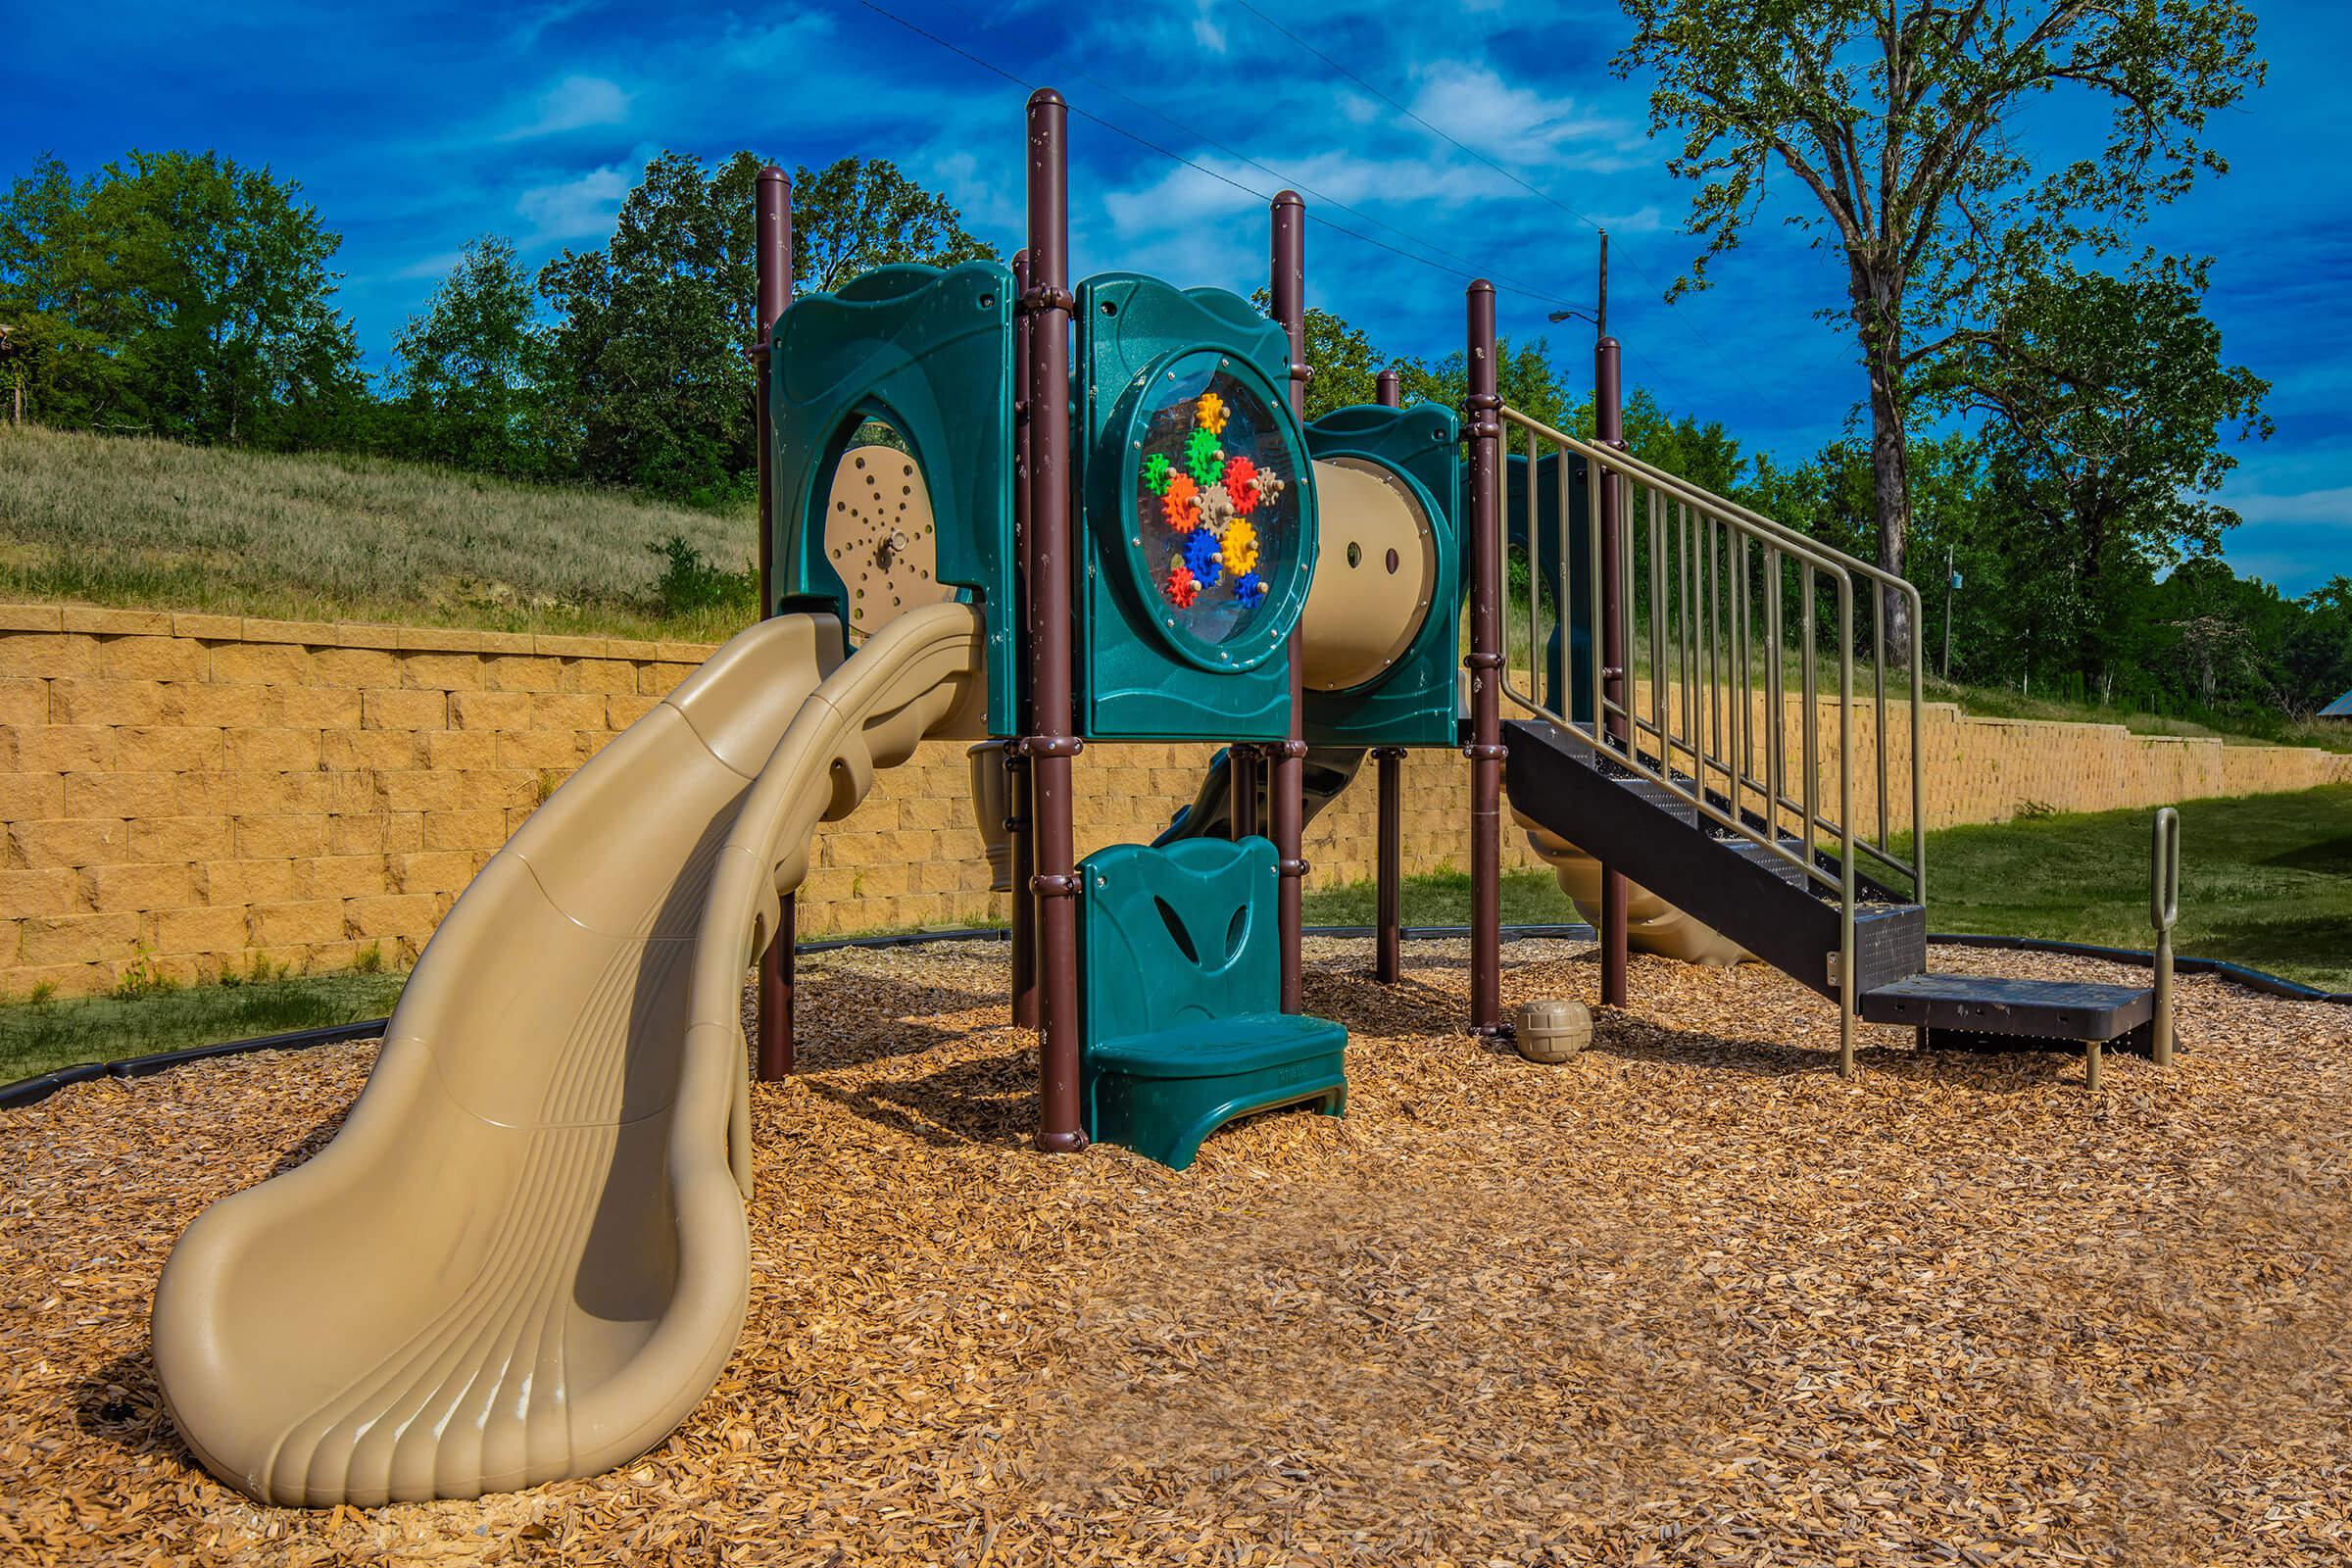 MAKE MEMORIES AT THE PLAY AREA